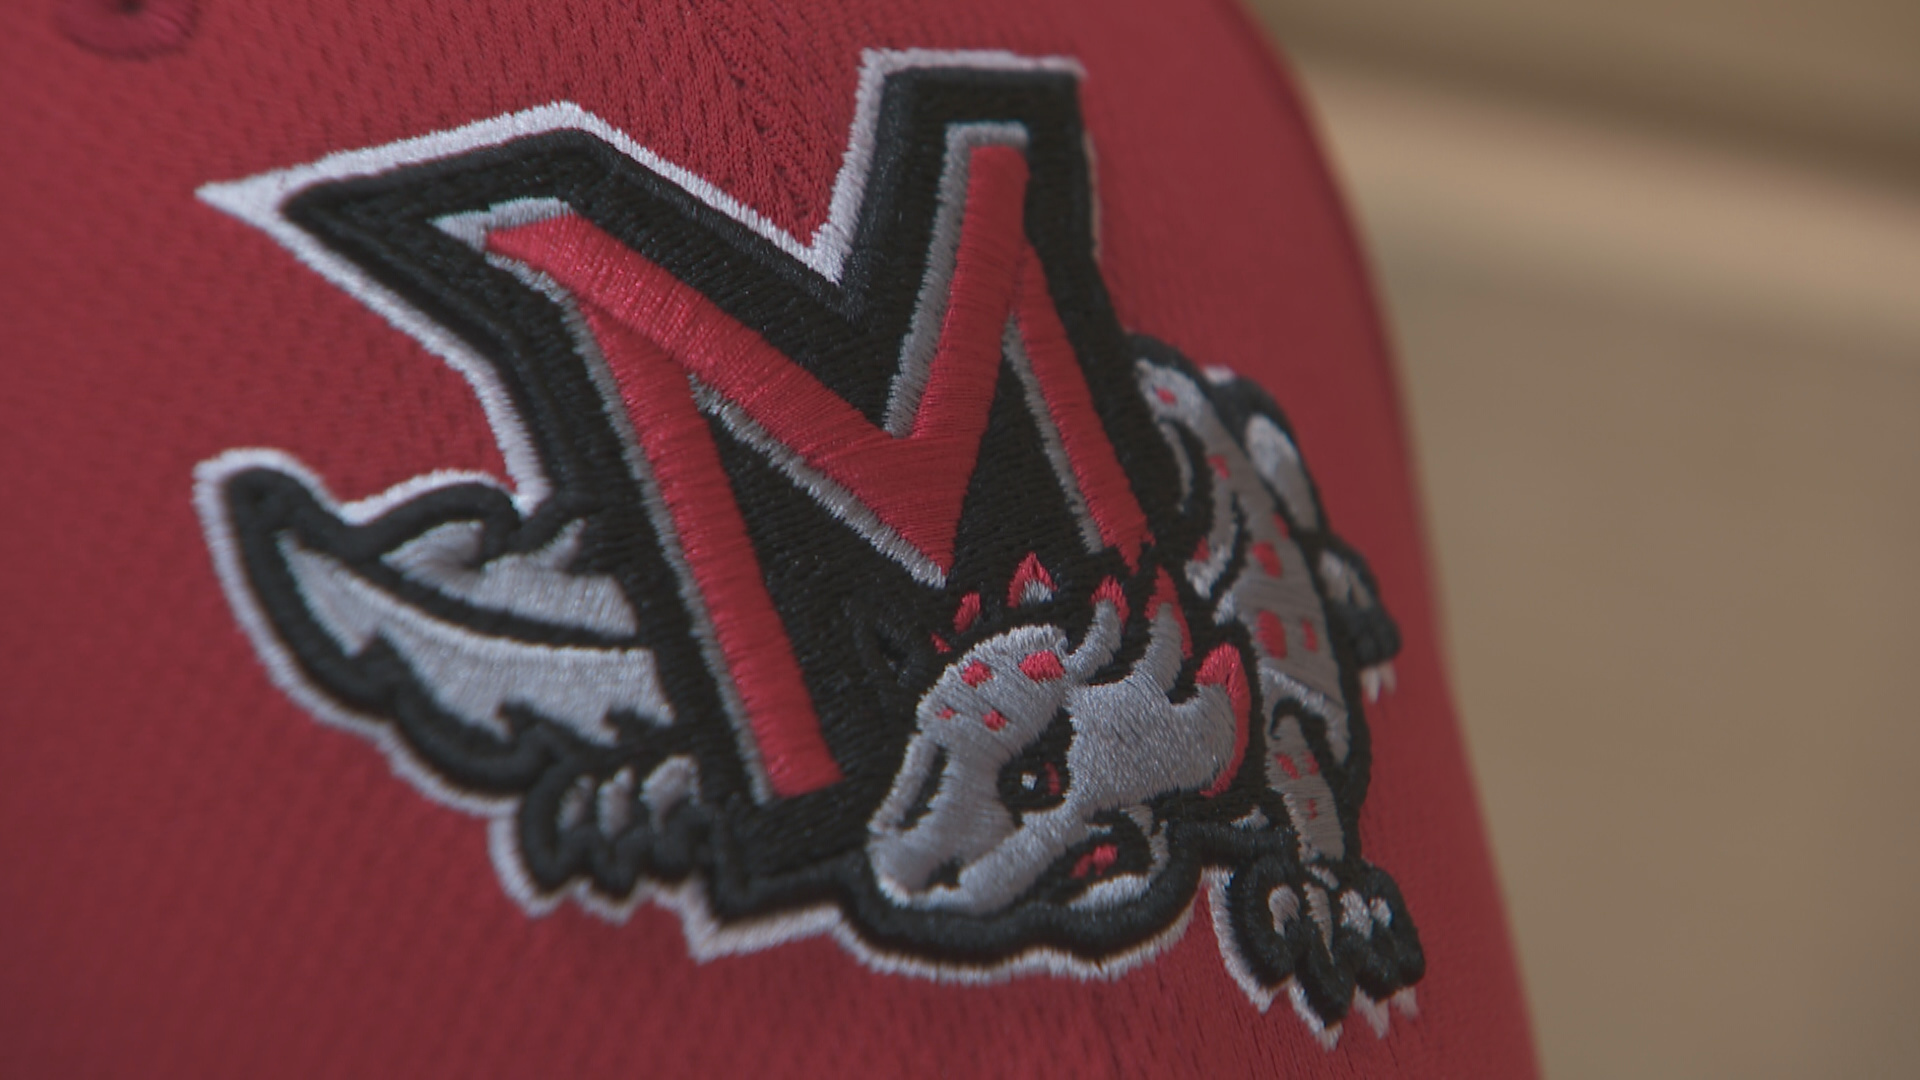 The Northwoods League team based in the Twin Cities will be playing 36 road games this season as the replacement team for the Thunder Bay Border Cats.